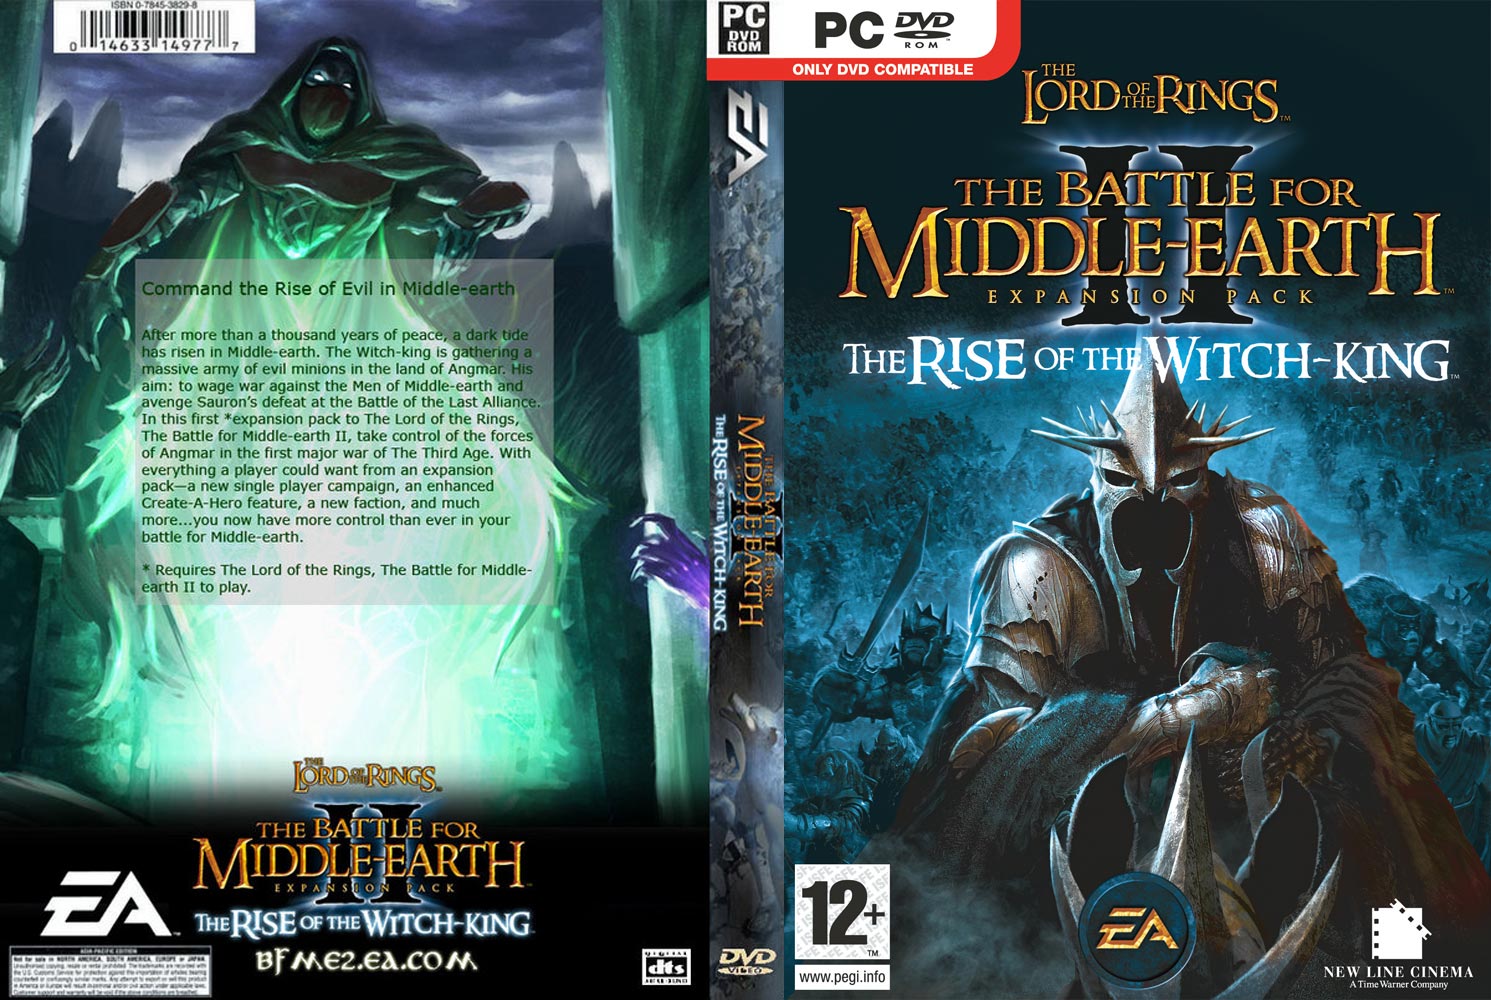 Властелин колец читы. The Battle for Middle-Earth 2 диск. The Battle for Middle-Earth 2 на Xbox 360. Battle for Middle-Earth II: Rise of the Witch King.